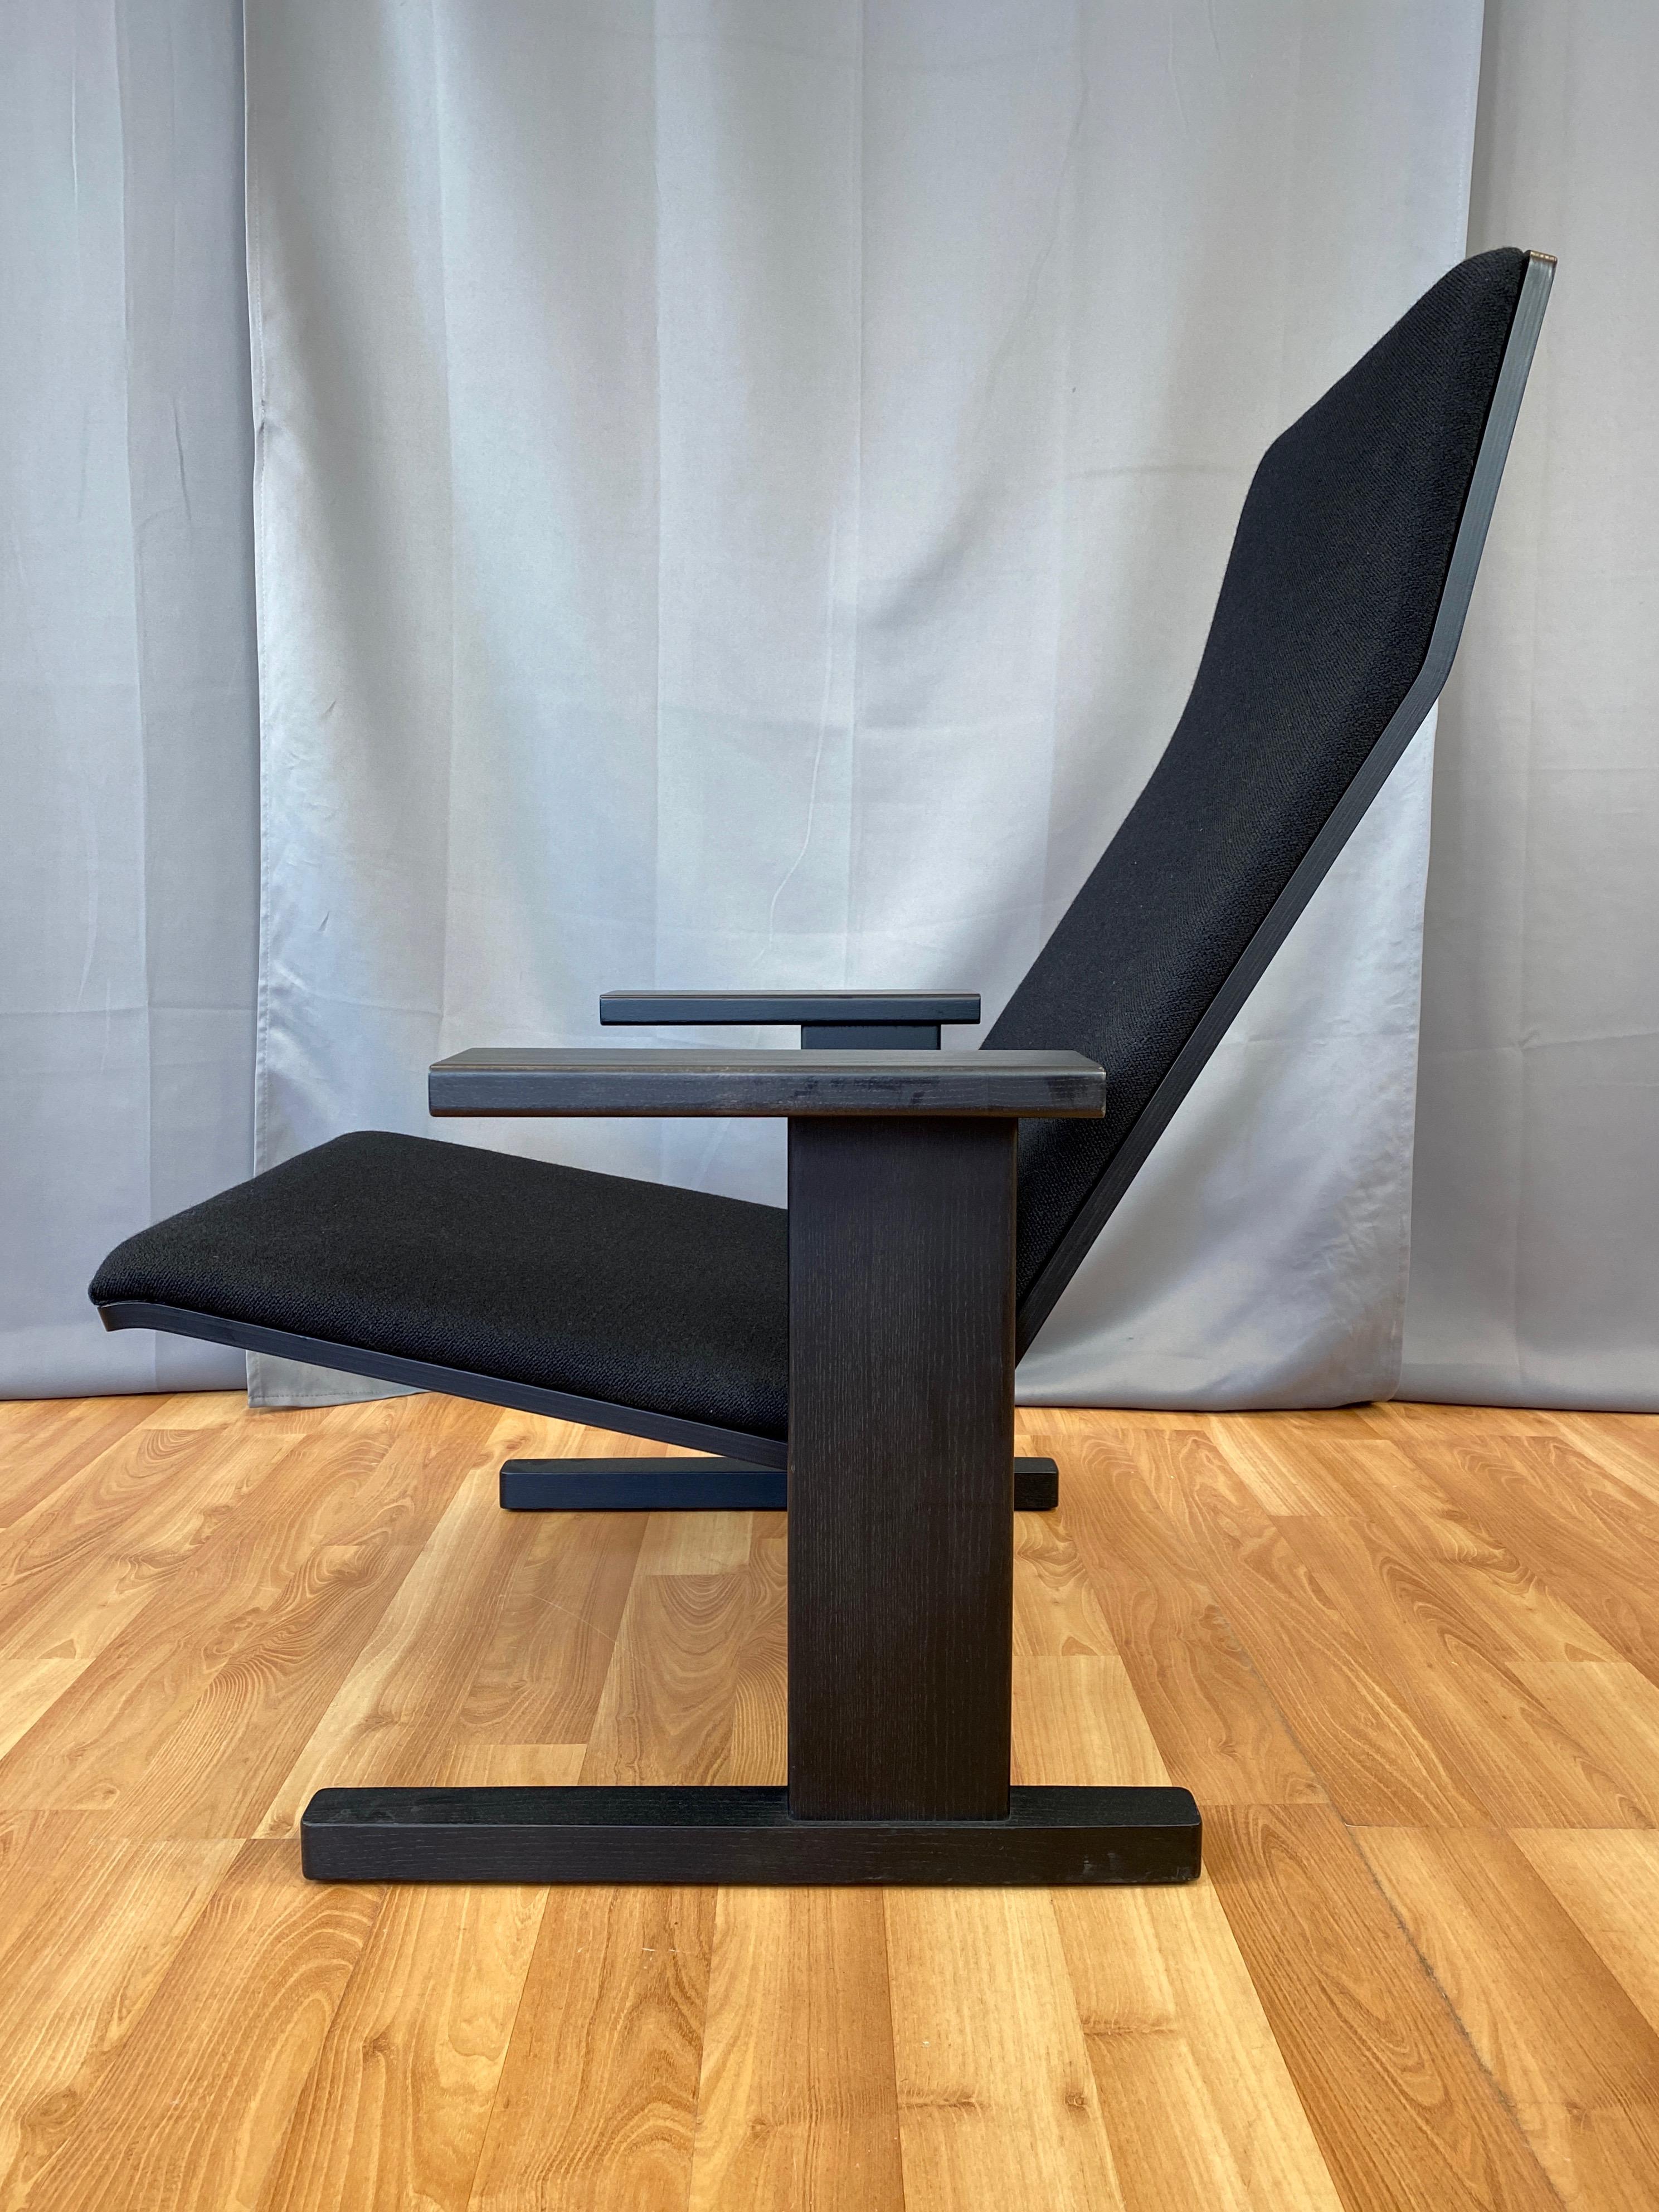 Ronan & Erwan Bouroullec for Mattiazzi Black Quindici Lounge Chair, 2018 In Good Condition For Sale In San Francisco, CA